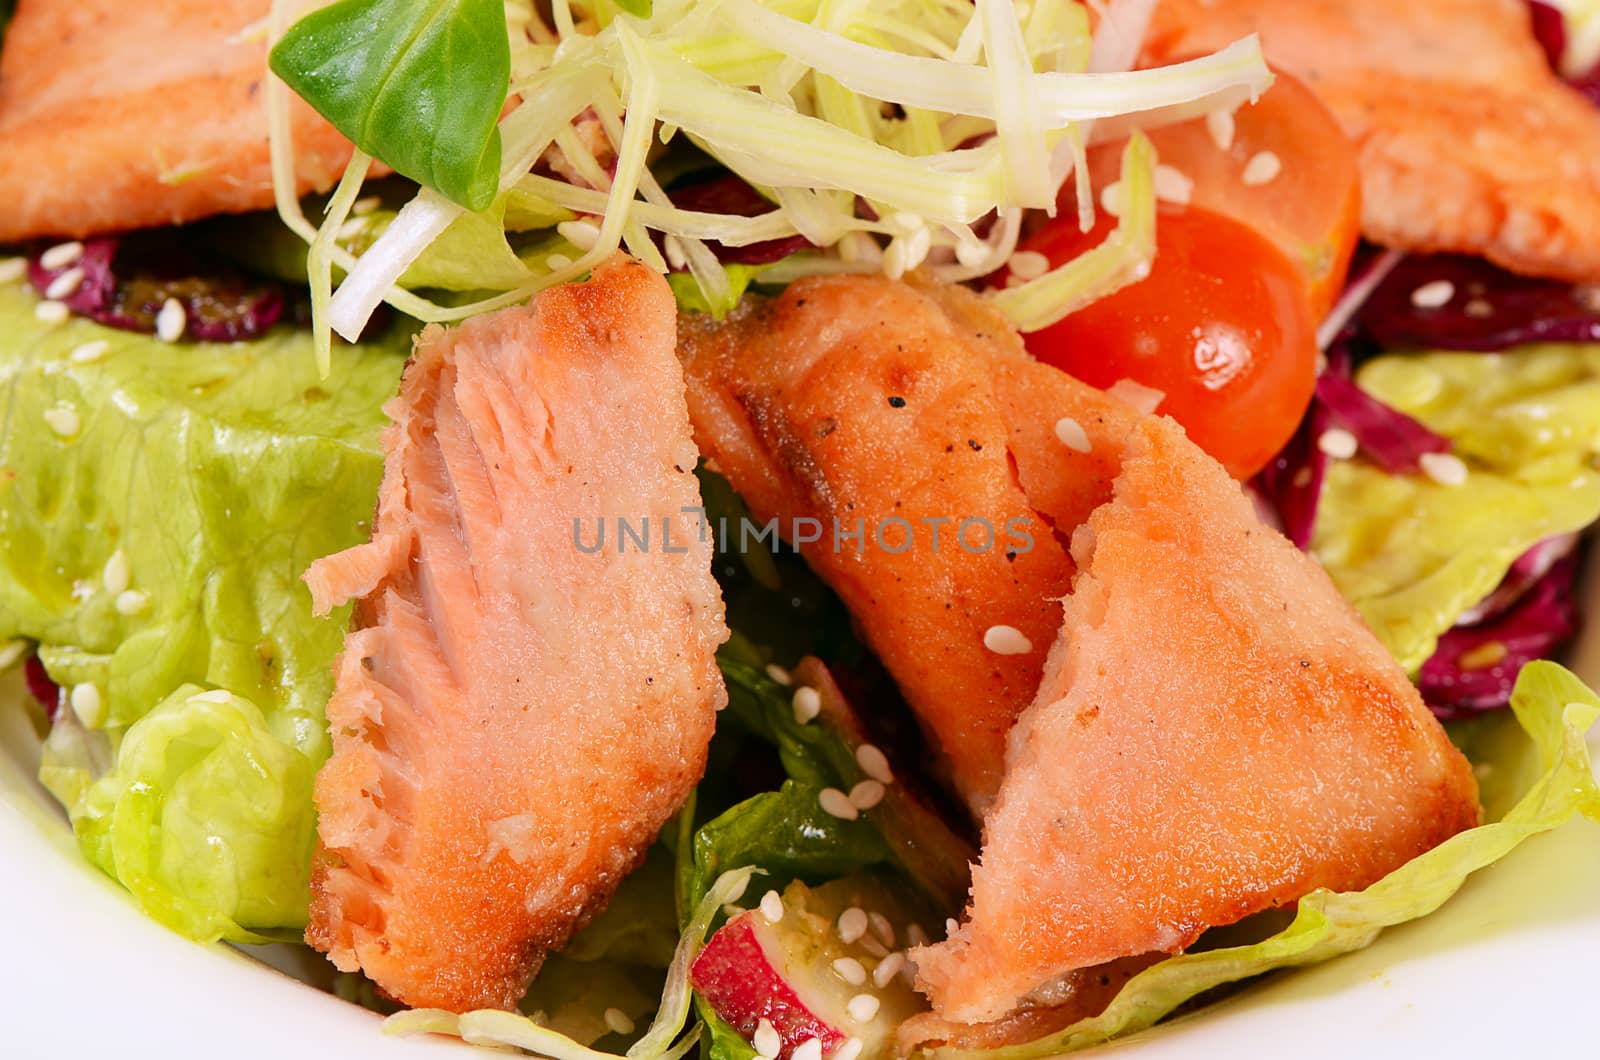 Salad from seafood and a salmon close up by SvetaVo